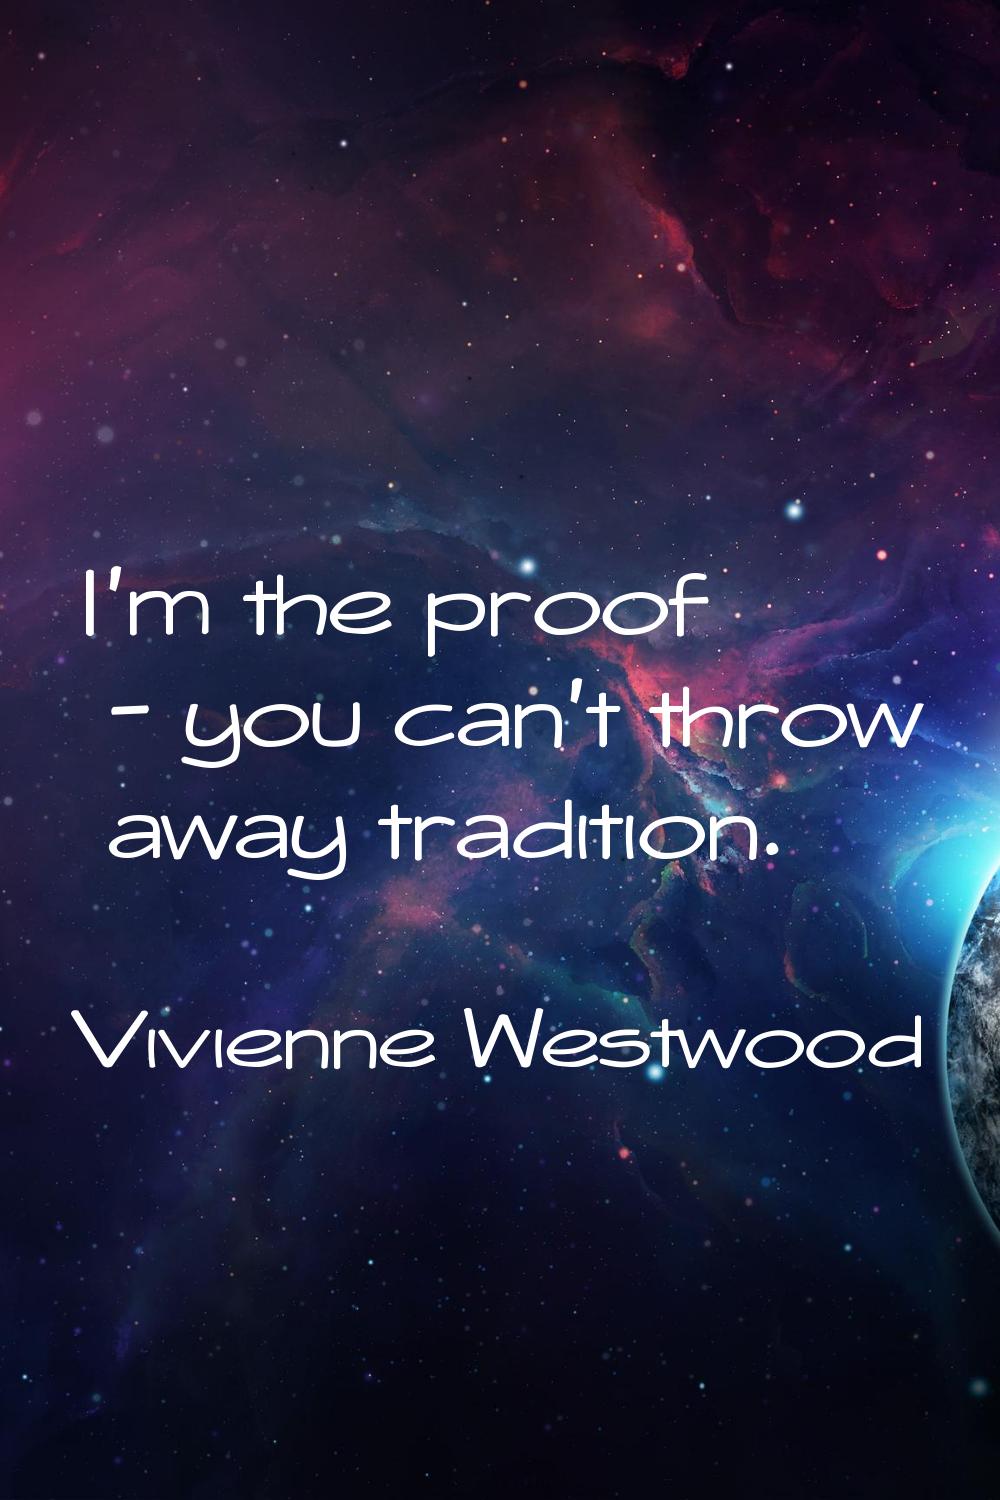 I'm the proof - you can't throw away tradition.